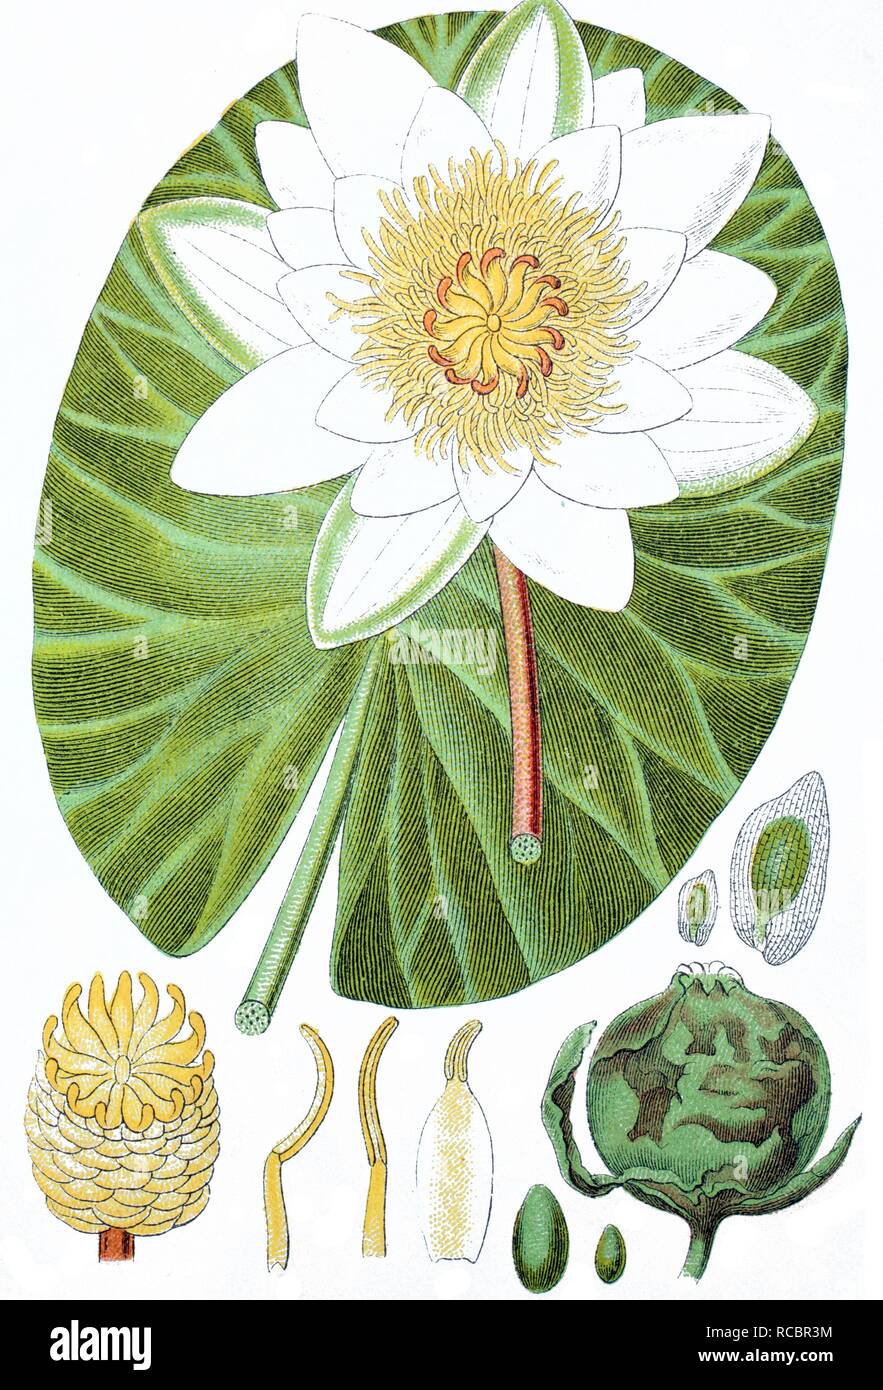 Waterlily (Nymphaea polystigma), medicinal plant, crop plant, chromolithography, about 1870 Stock Photo